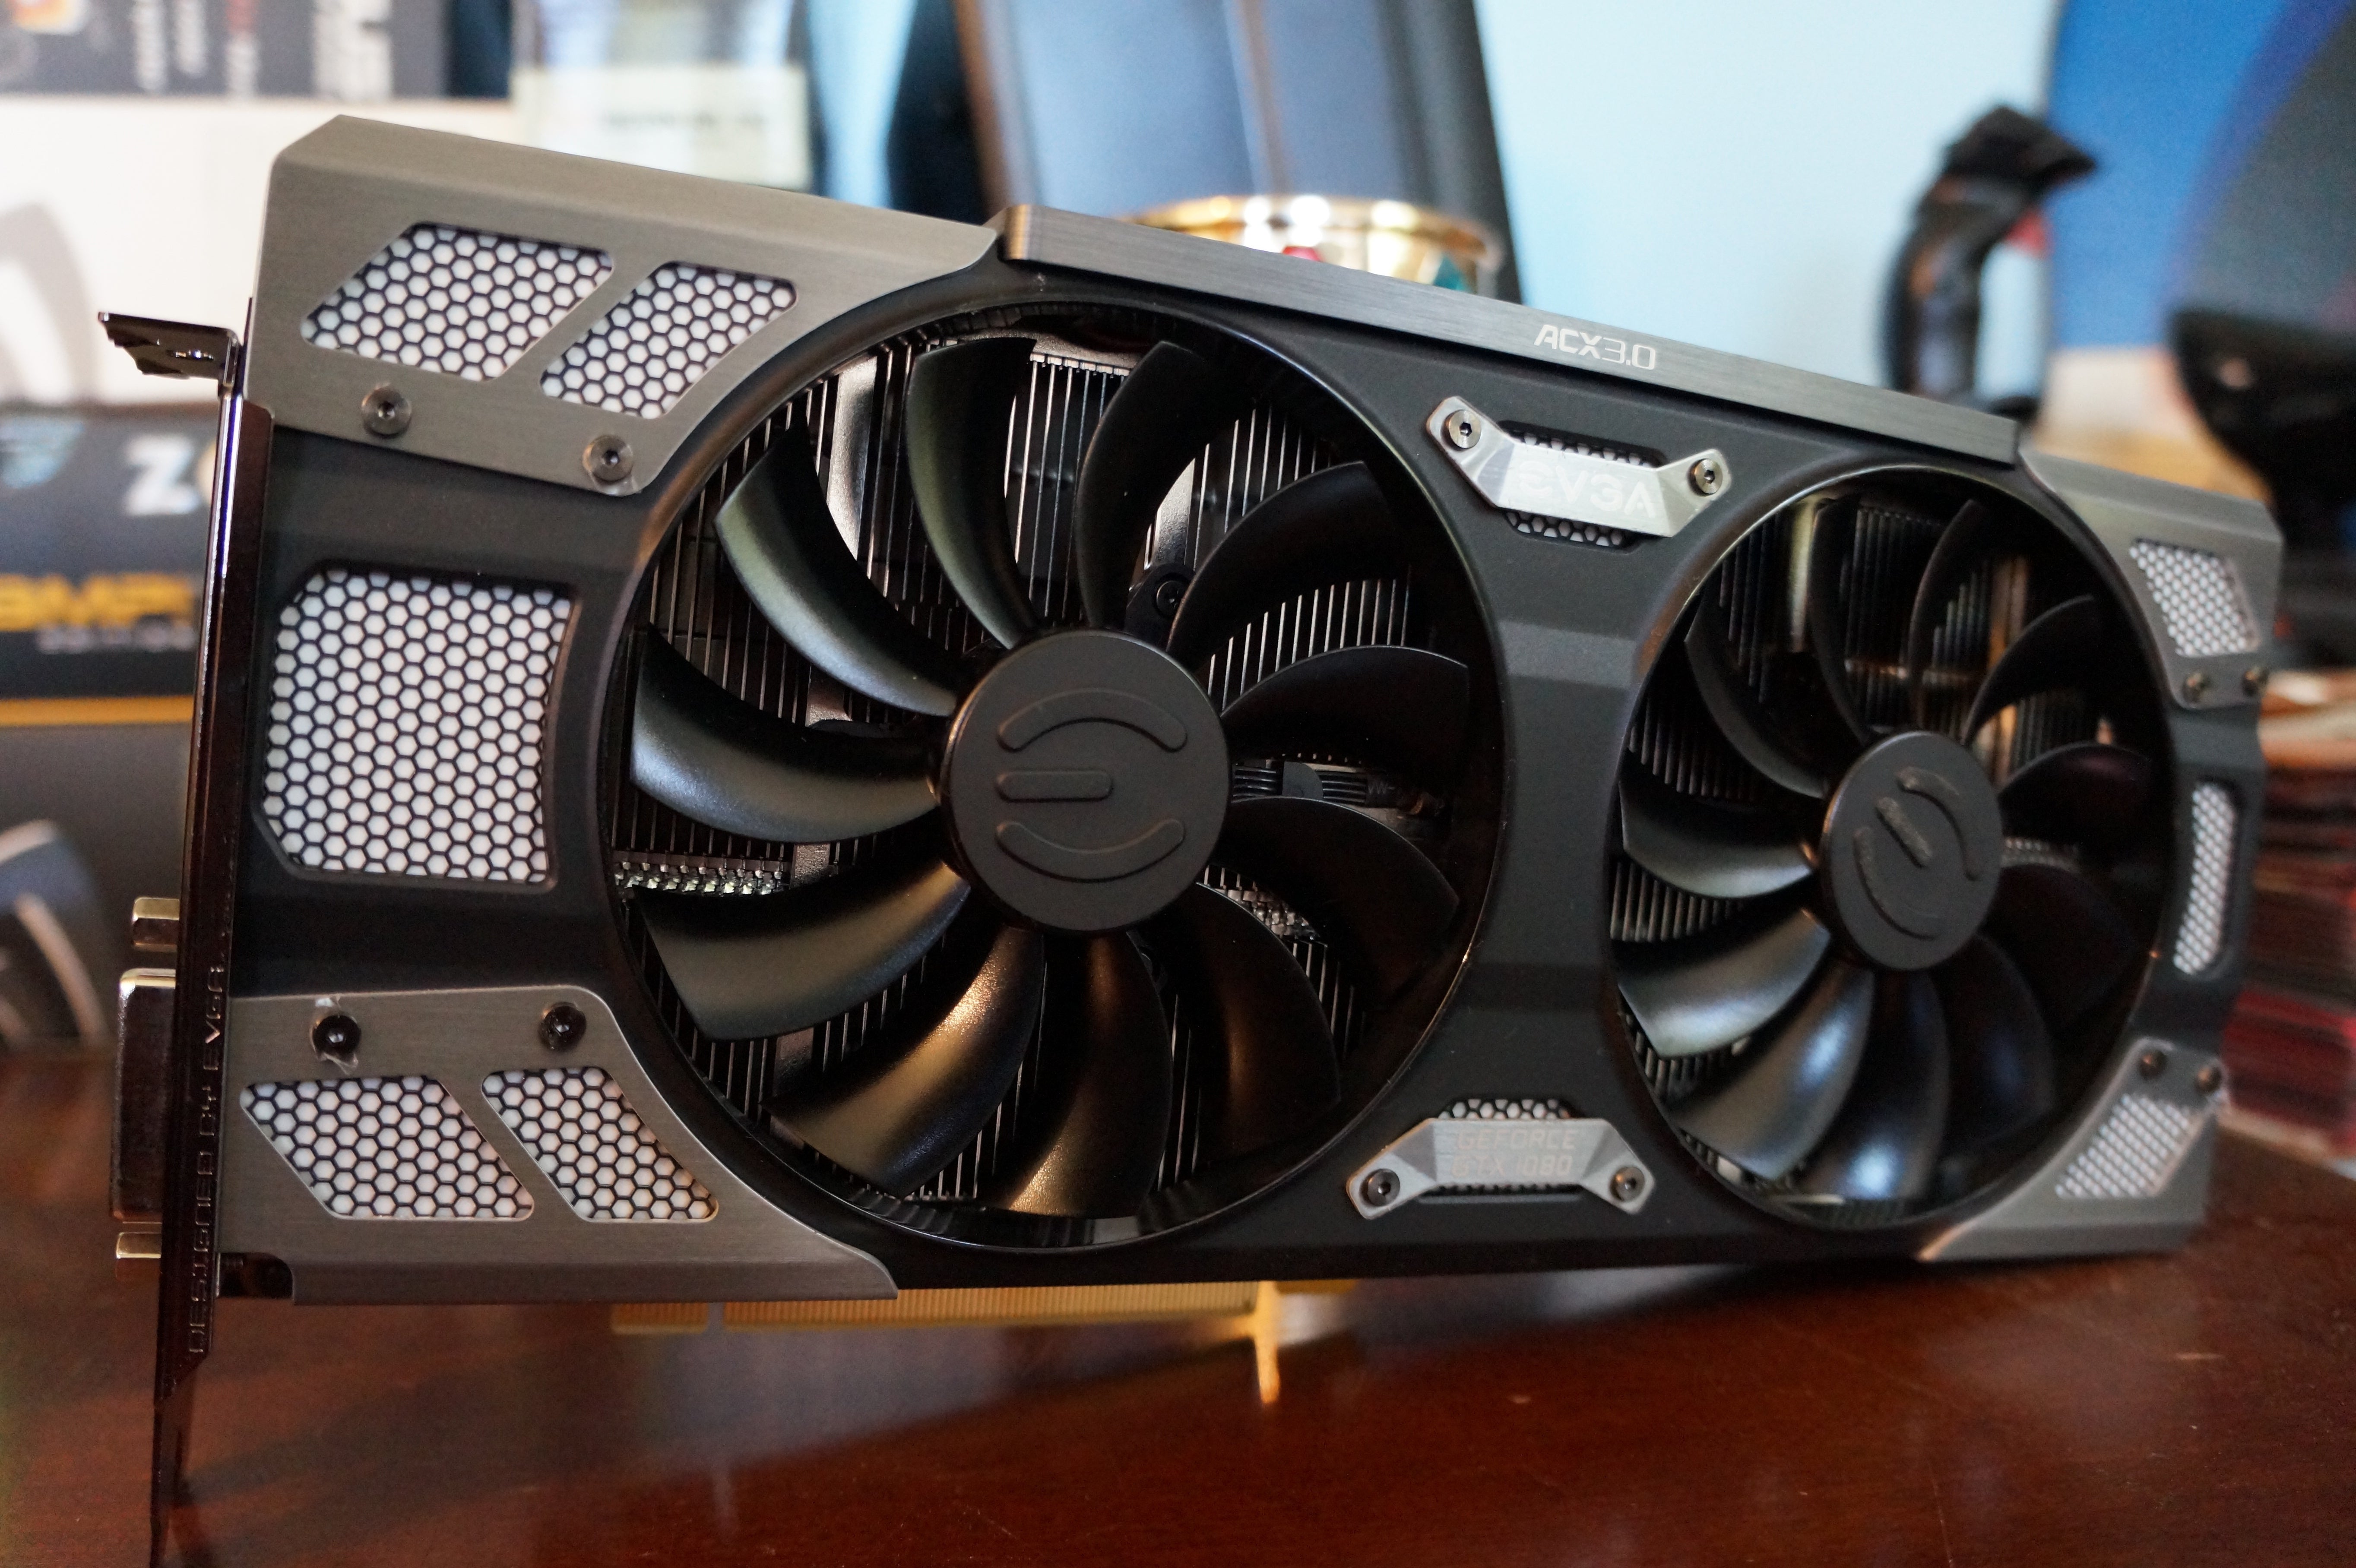 Evga Gtx 1080 Ftw Review The Most Powerful Graphics Card In The World Made Better Nvidia Pc World